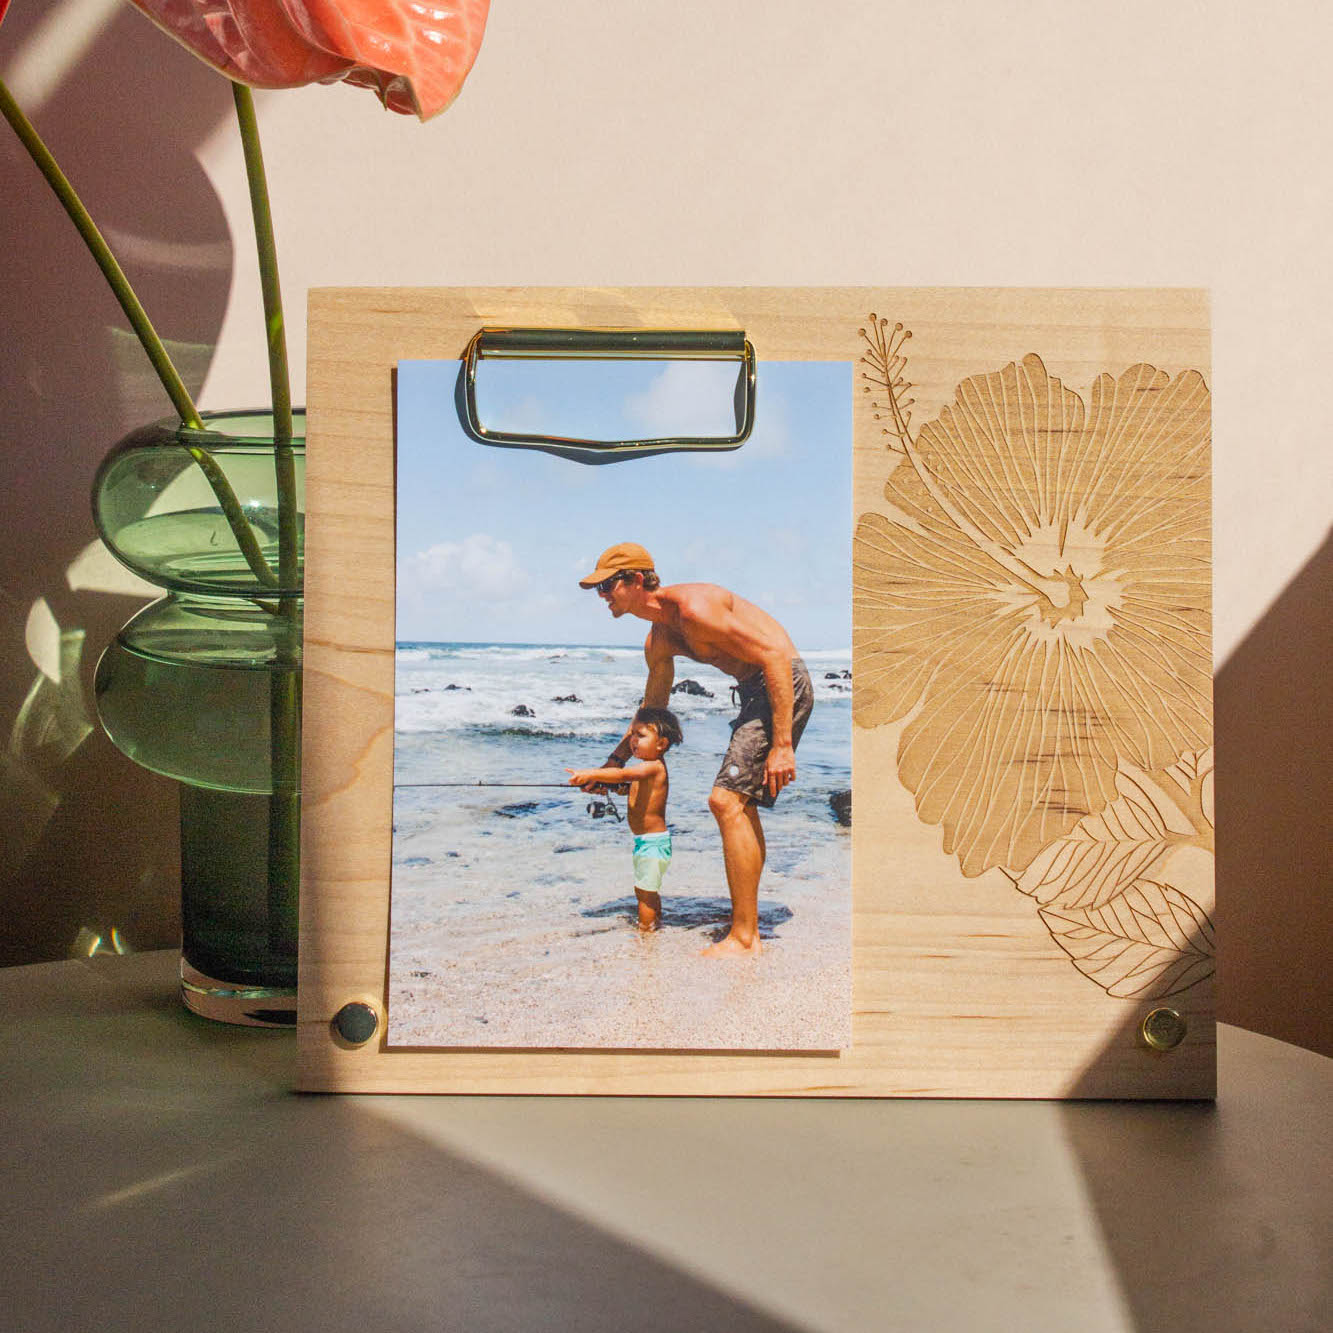 Hereafter Wood Picture Frame